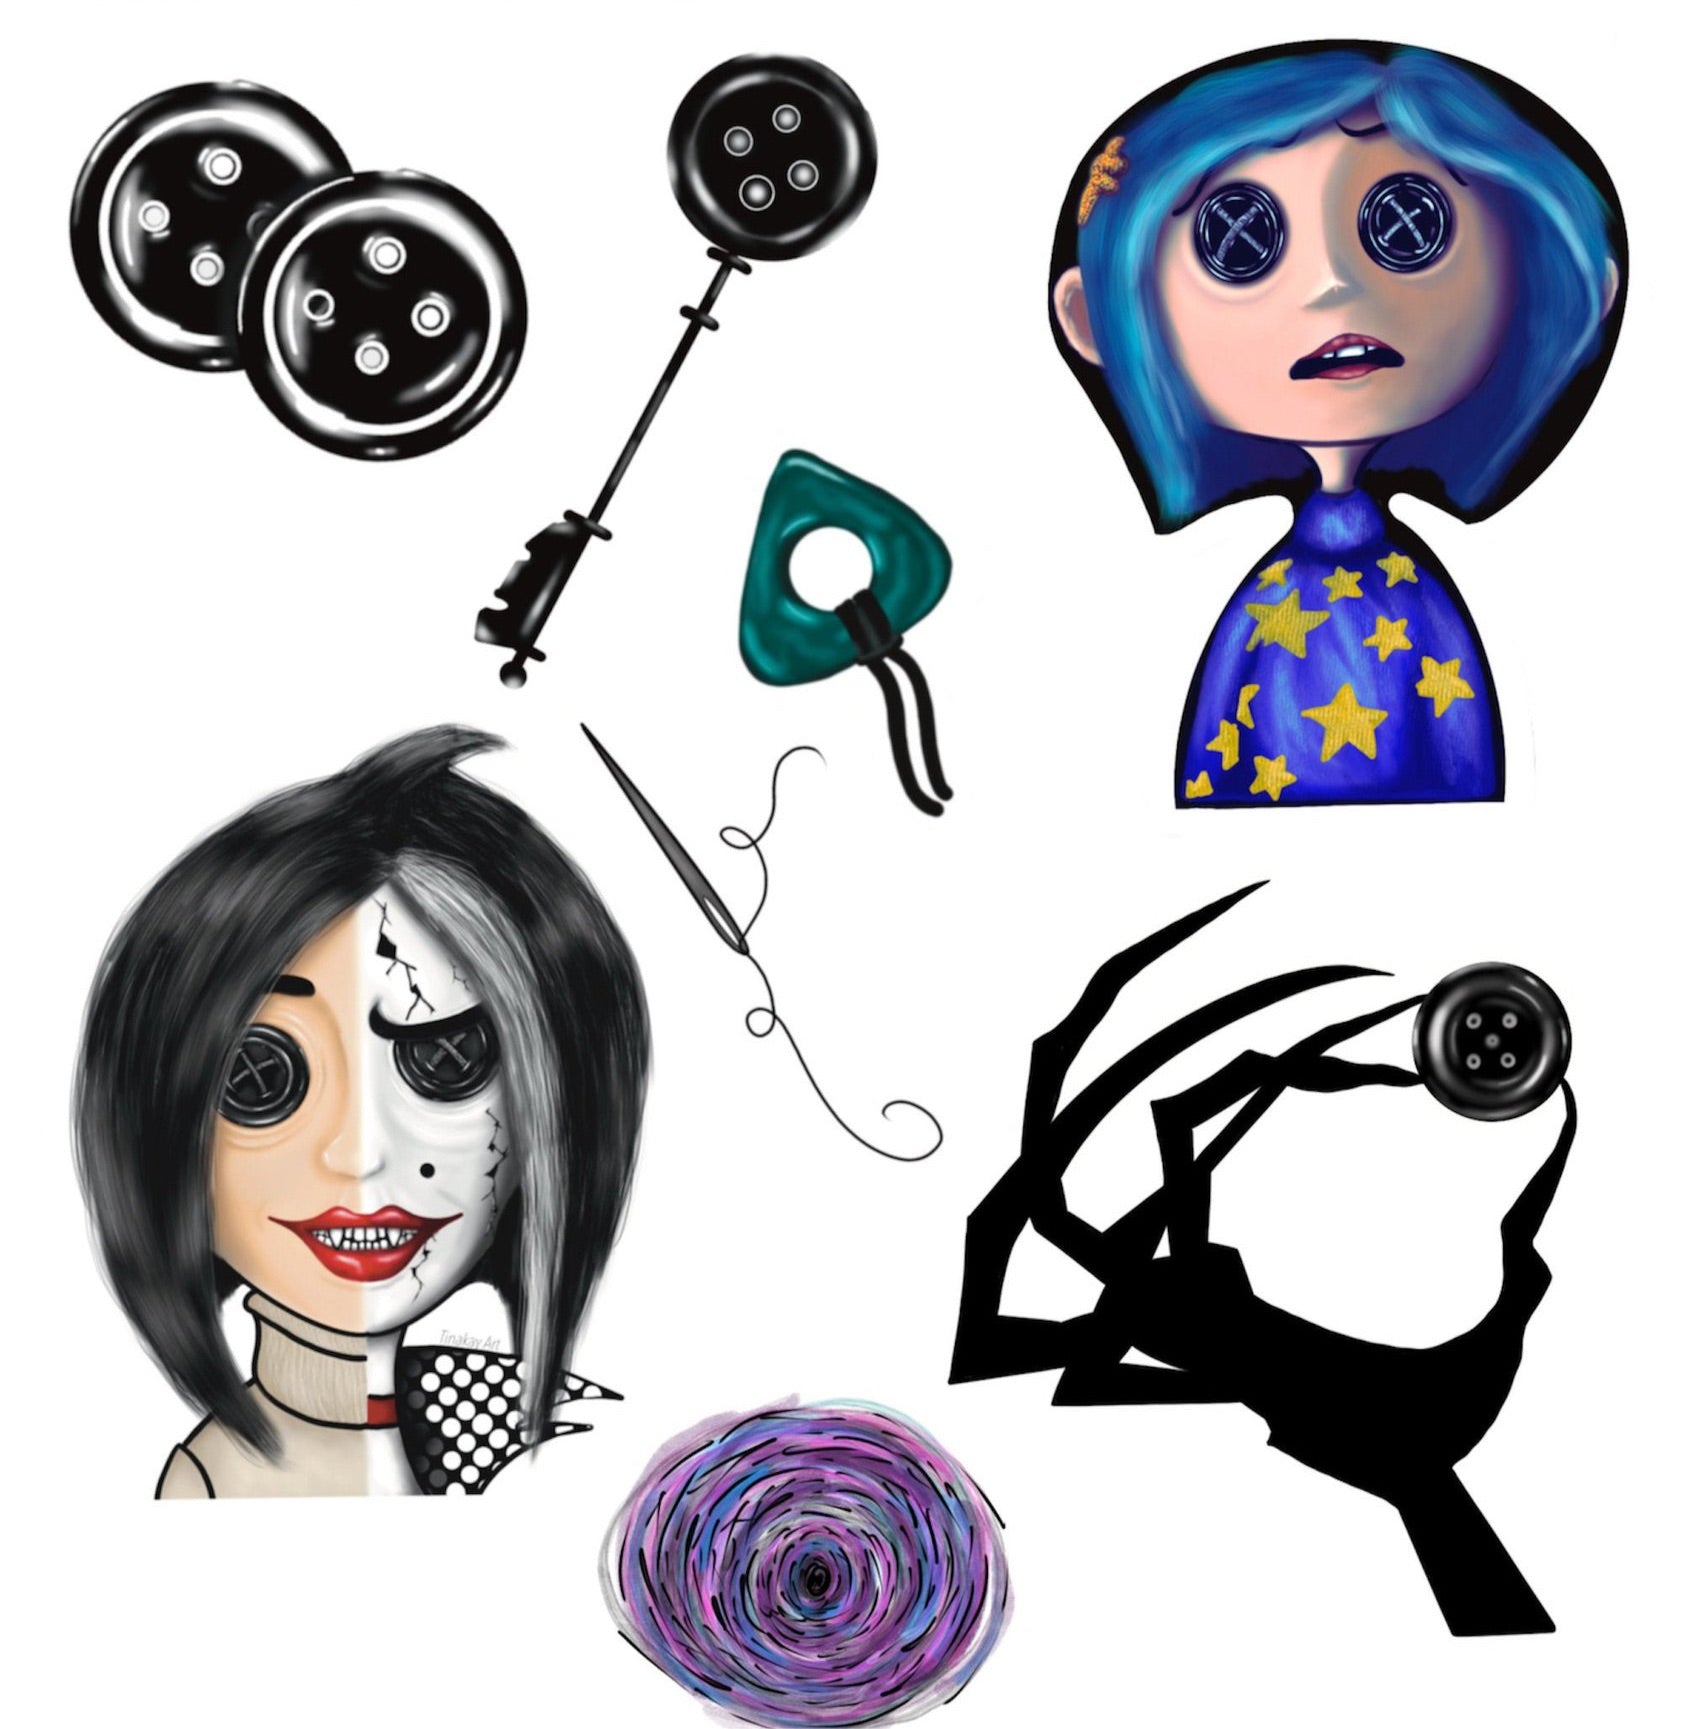 What Is Coraline's Other Mother?